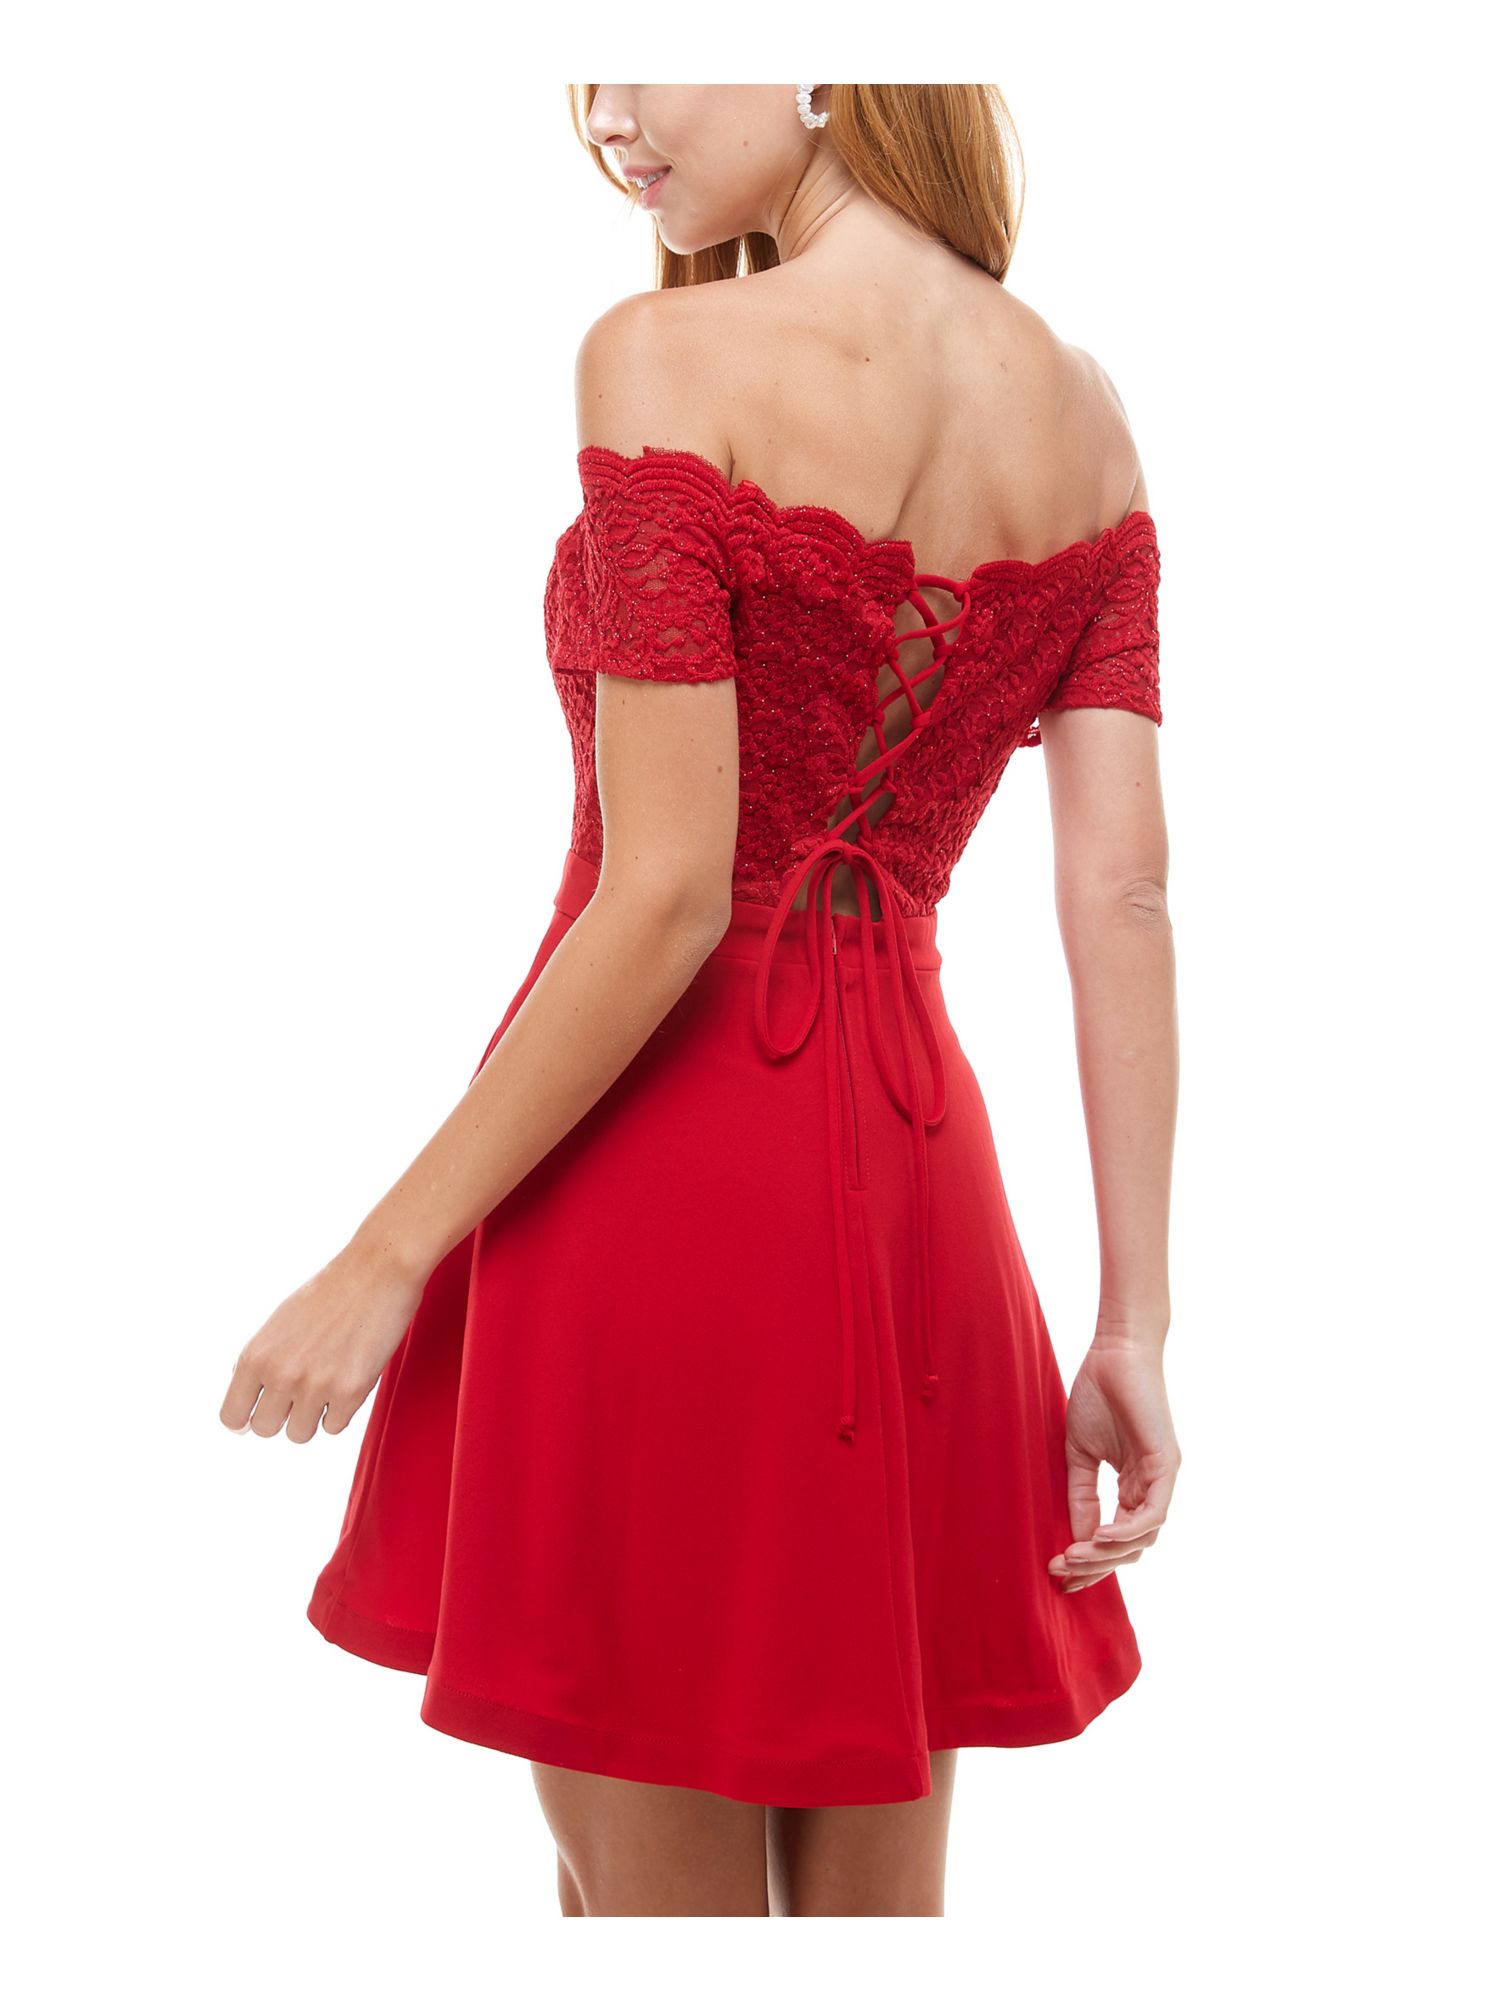 CITY STUDIO Womens Red Glitter Lace Scalloped Lace-up Short Sleeve Off Shoulder Short Party Fit + Flare Dress Juniors 15